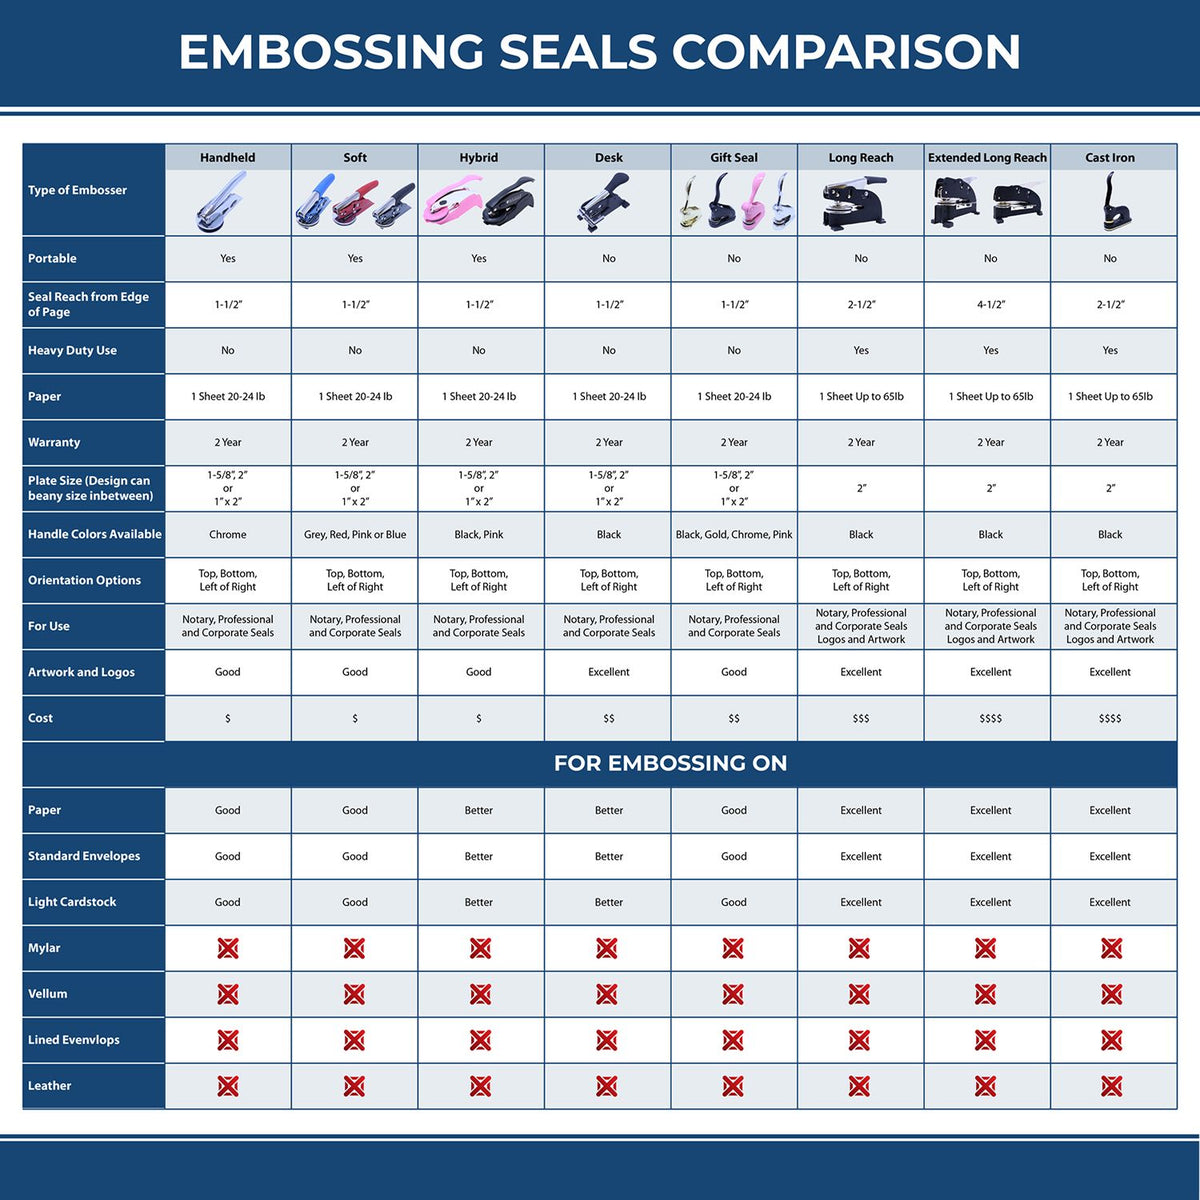 A comparison chart for the different types of mount models available for the State of South Dakota Extended Long Reach Geologist Seal